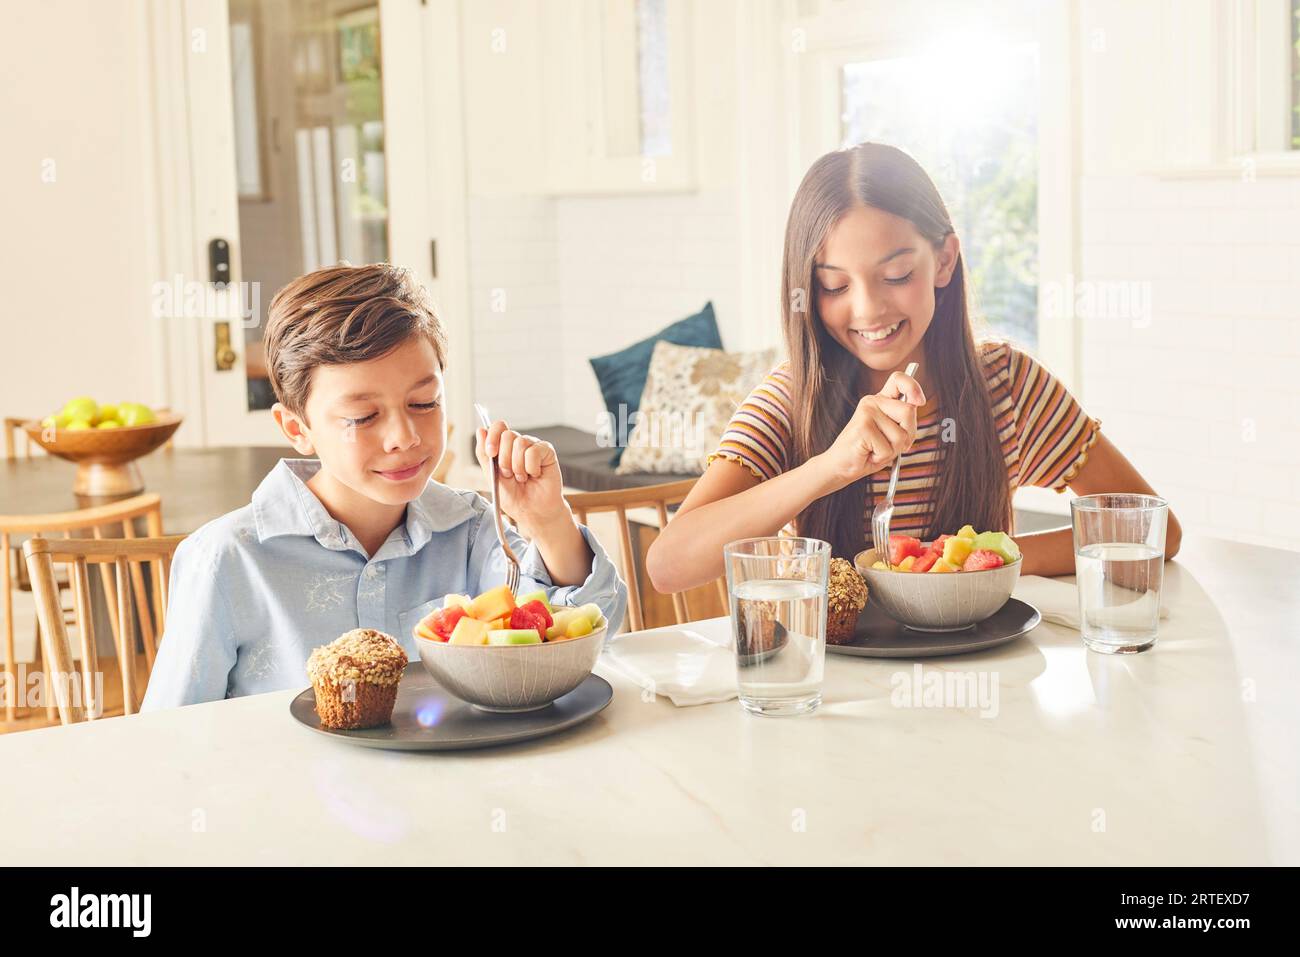 Smiling boy (8-9) and girl (12-13) having breakfast in kitchen Stock Photo